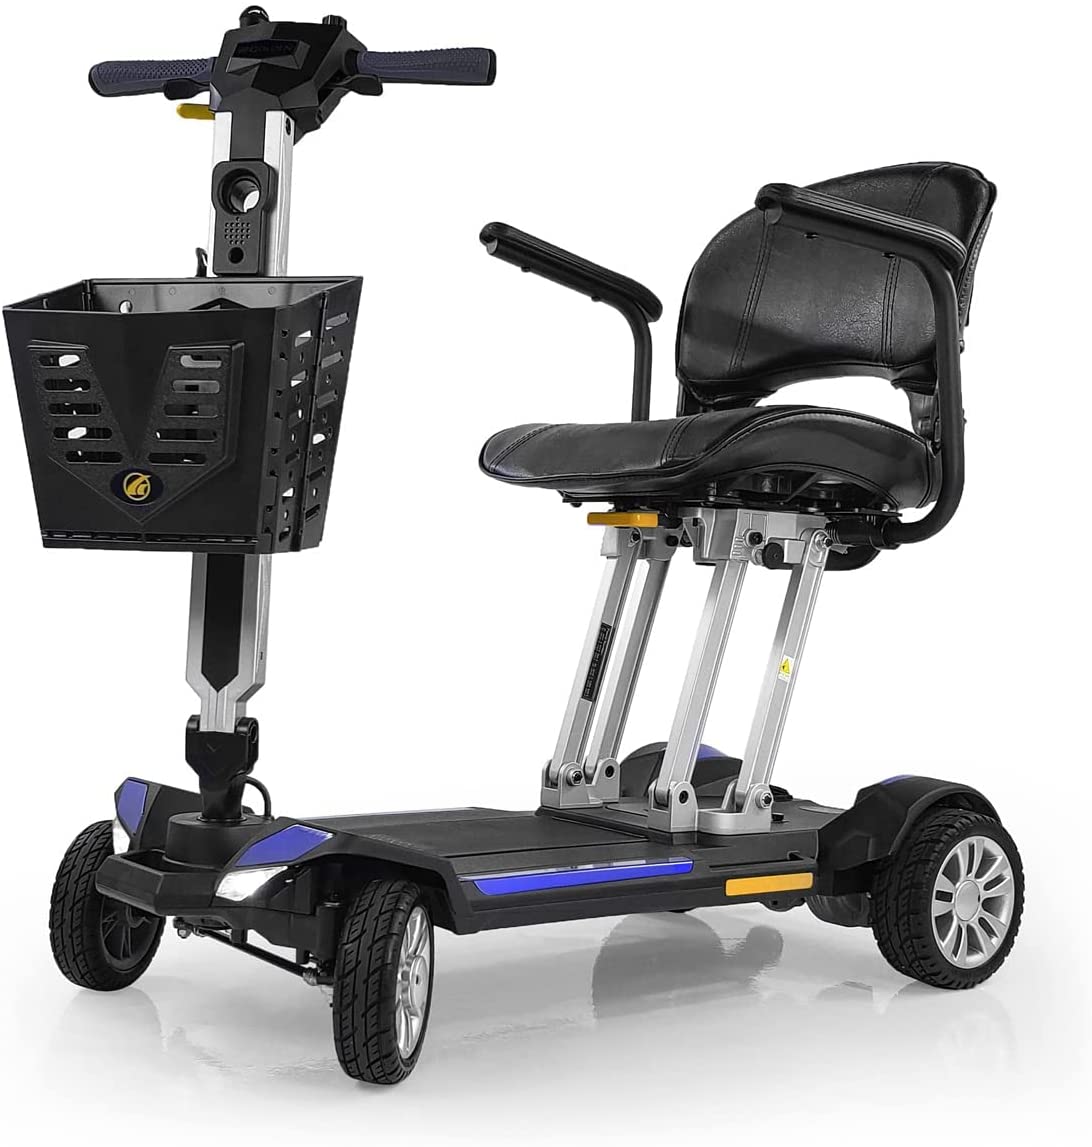 Buzzaround Carry On Folding Scooter Model GB120 by Golden Technologies - Midwest DME Supply